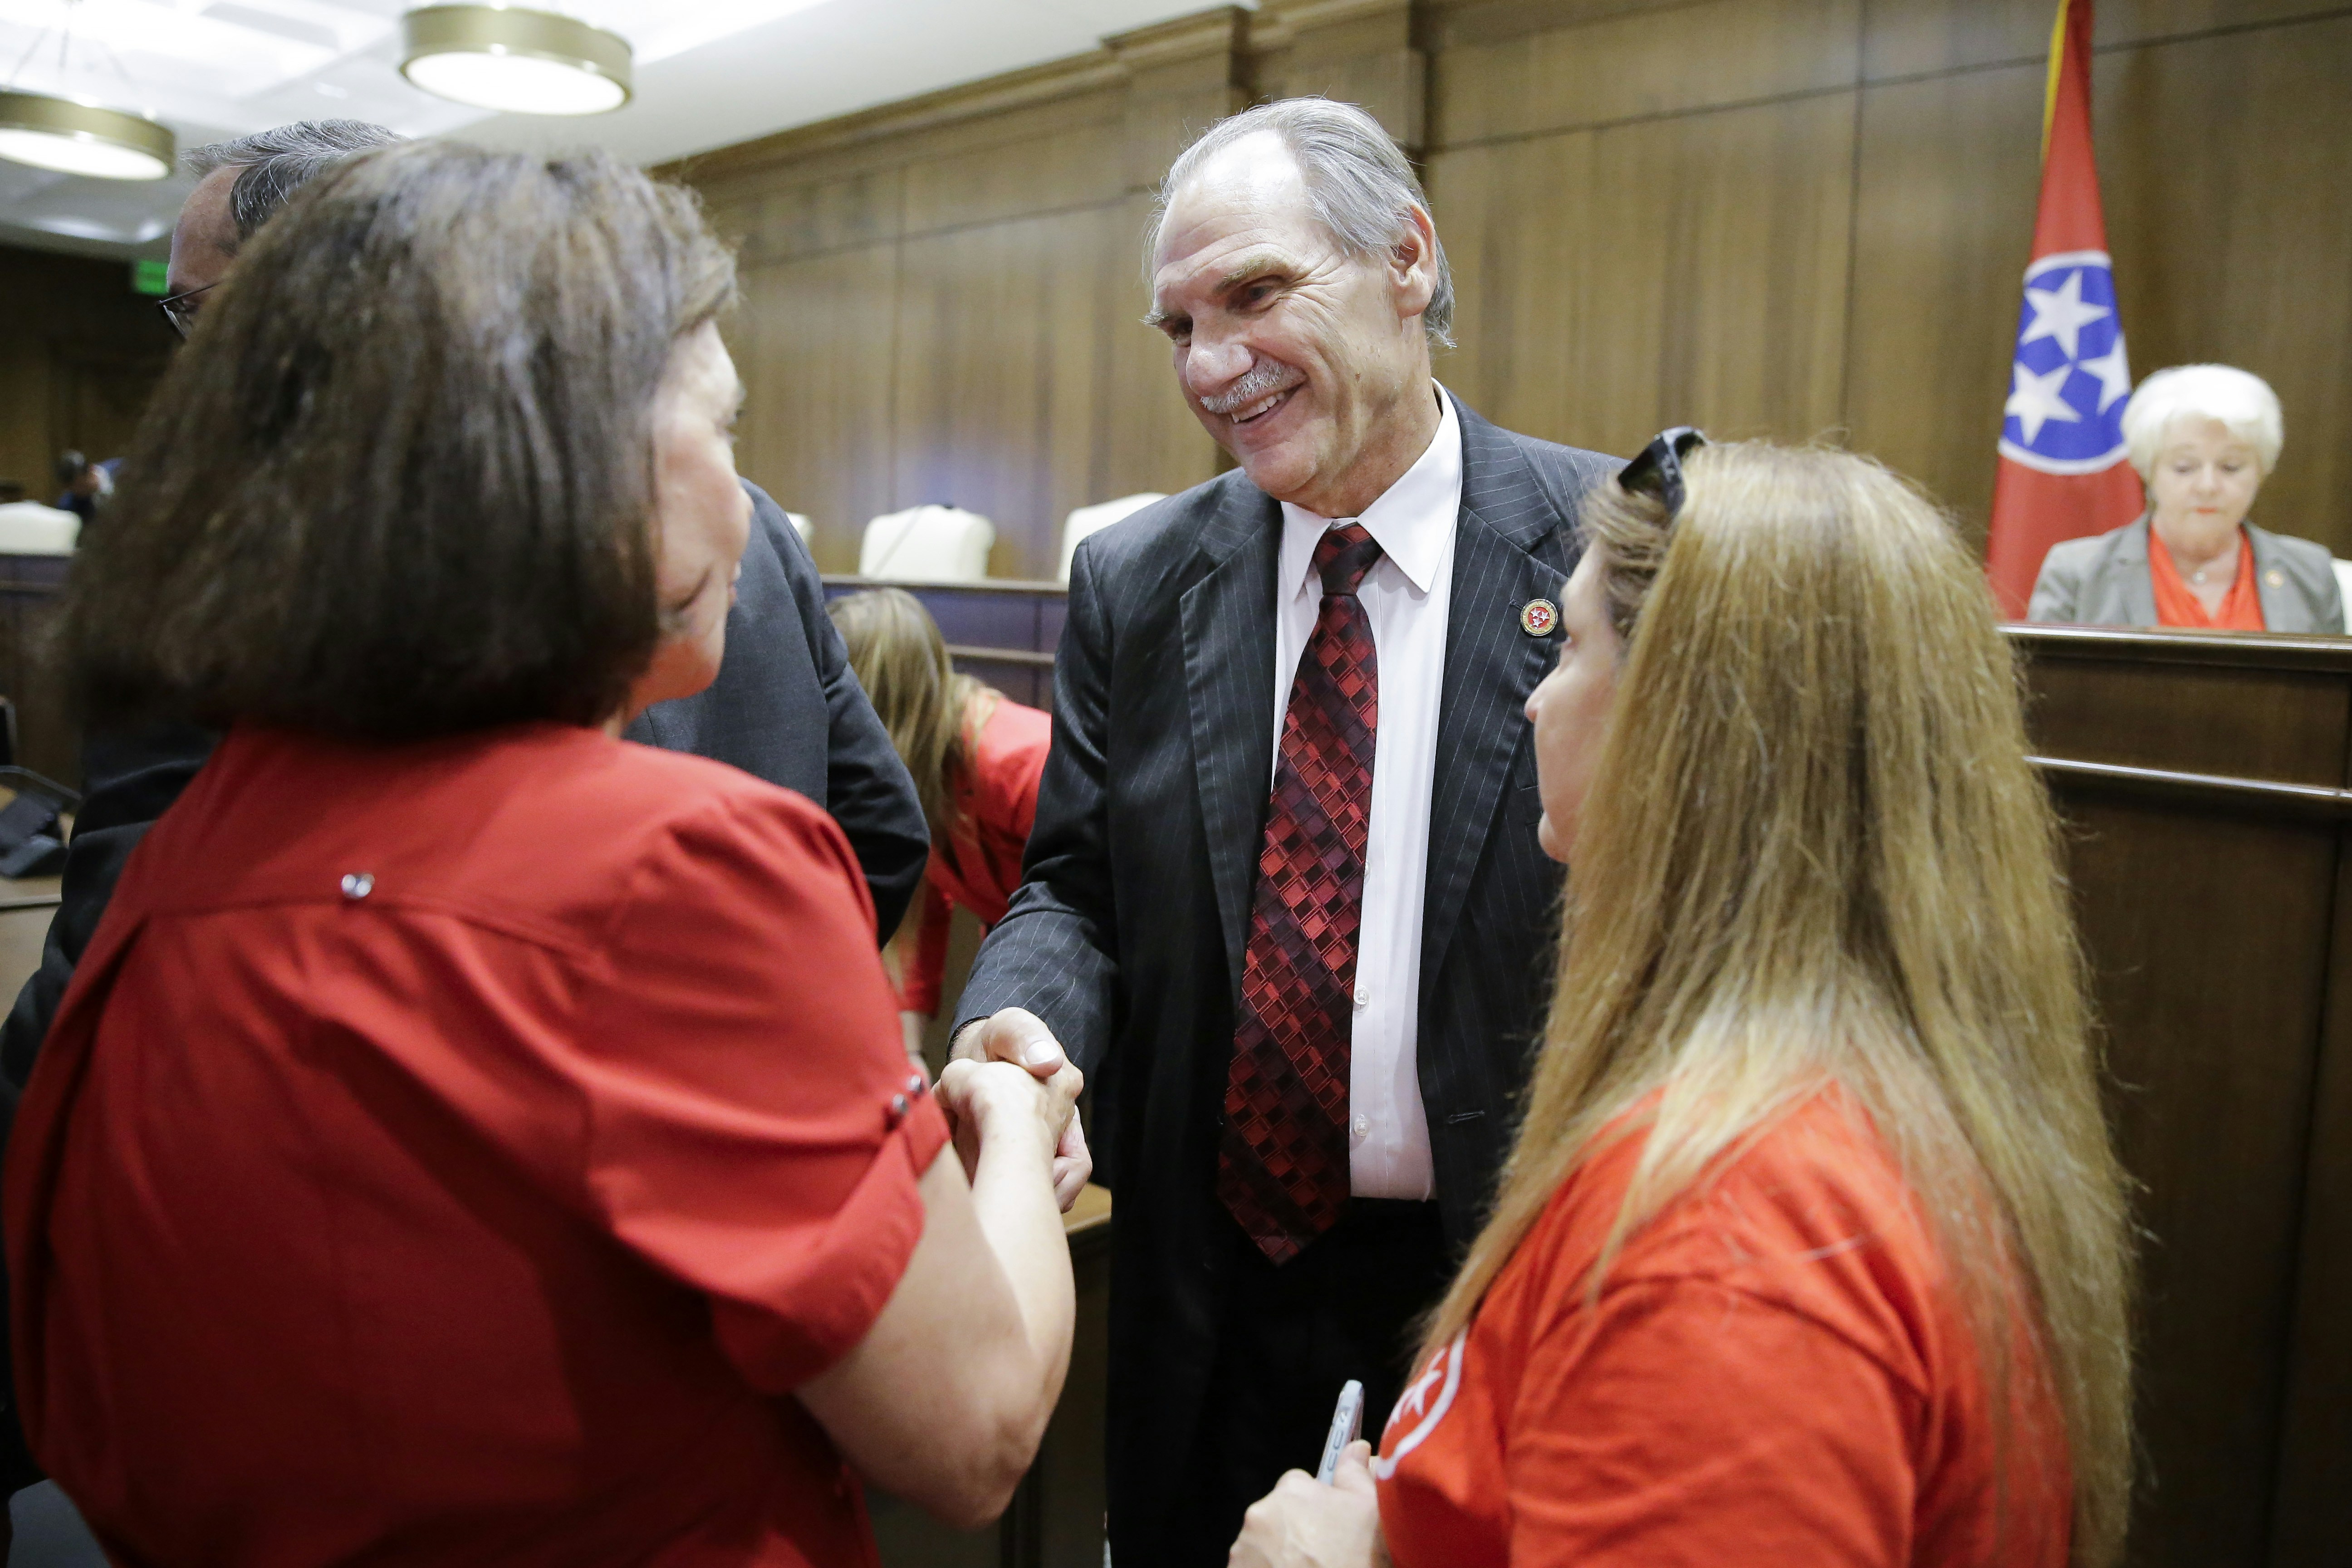 Sen. Mark Pody, R-Lebanon, talks with people attending a Senate hearing to discuss a fetal heartbeat abortion ban, or possibly something more restrictive, Monday, Aug. 12, 2019, in Nashville, Tenn. (AP Photo/Mark Humphrey)